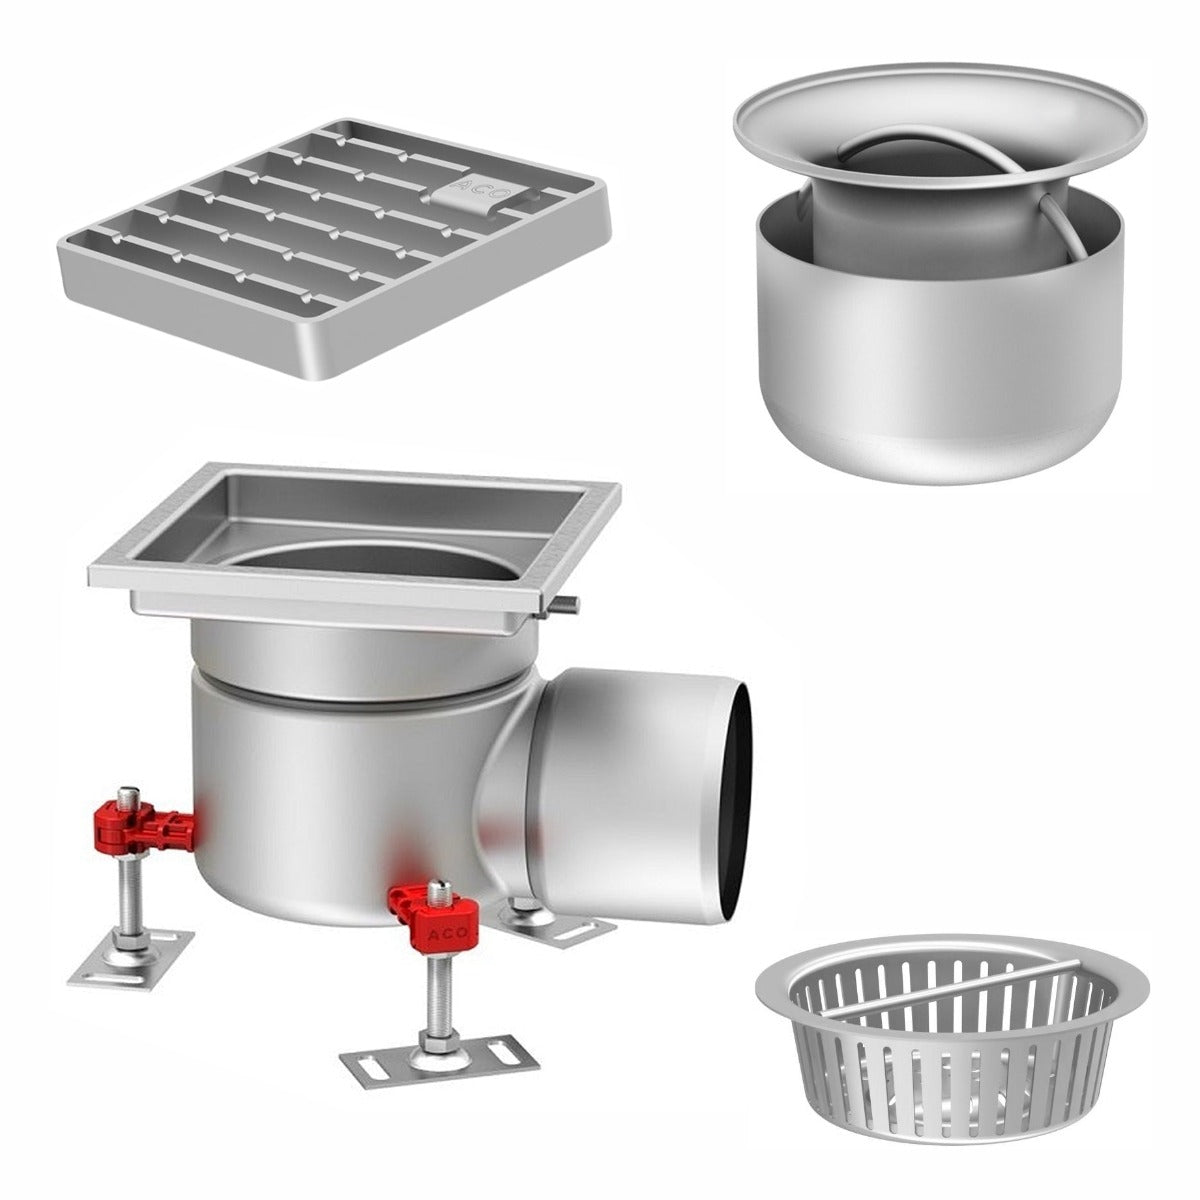 Stainless steel gully kits